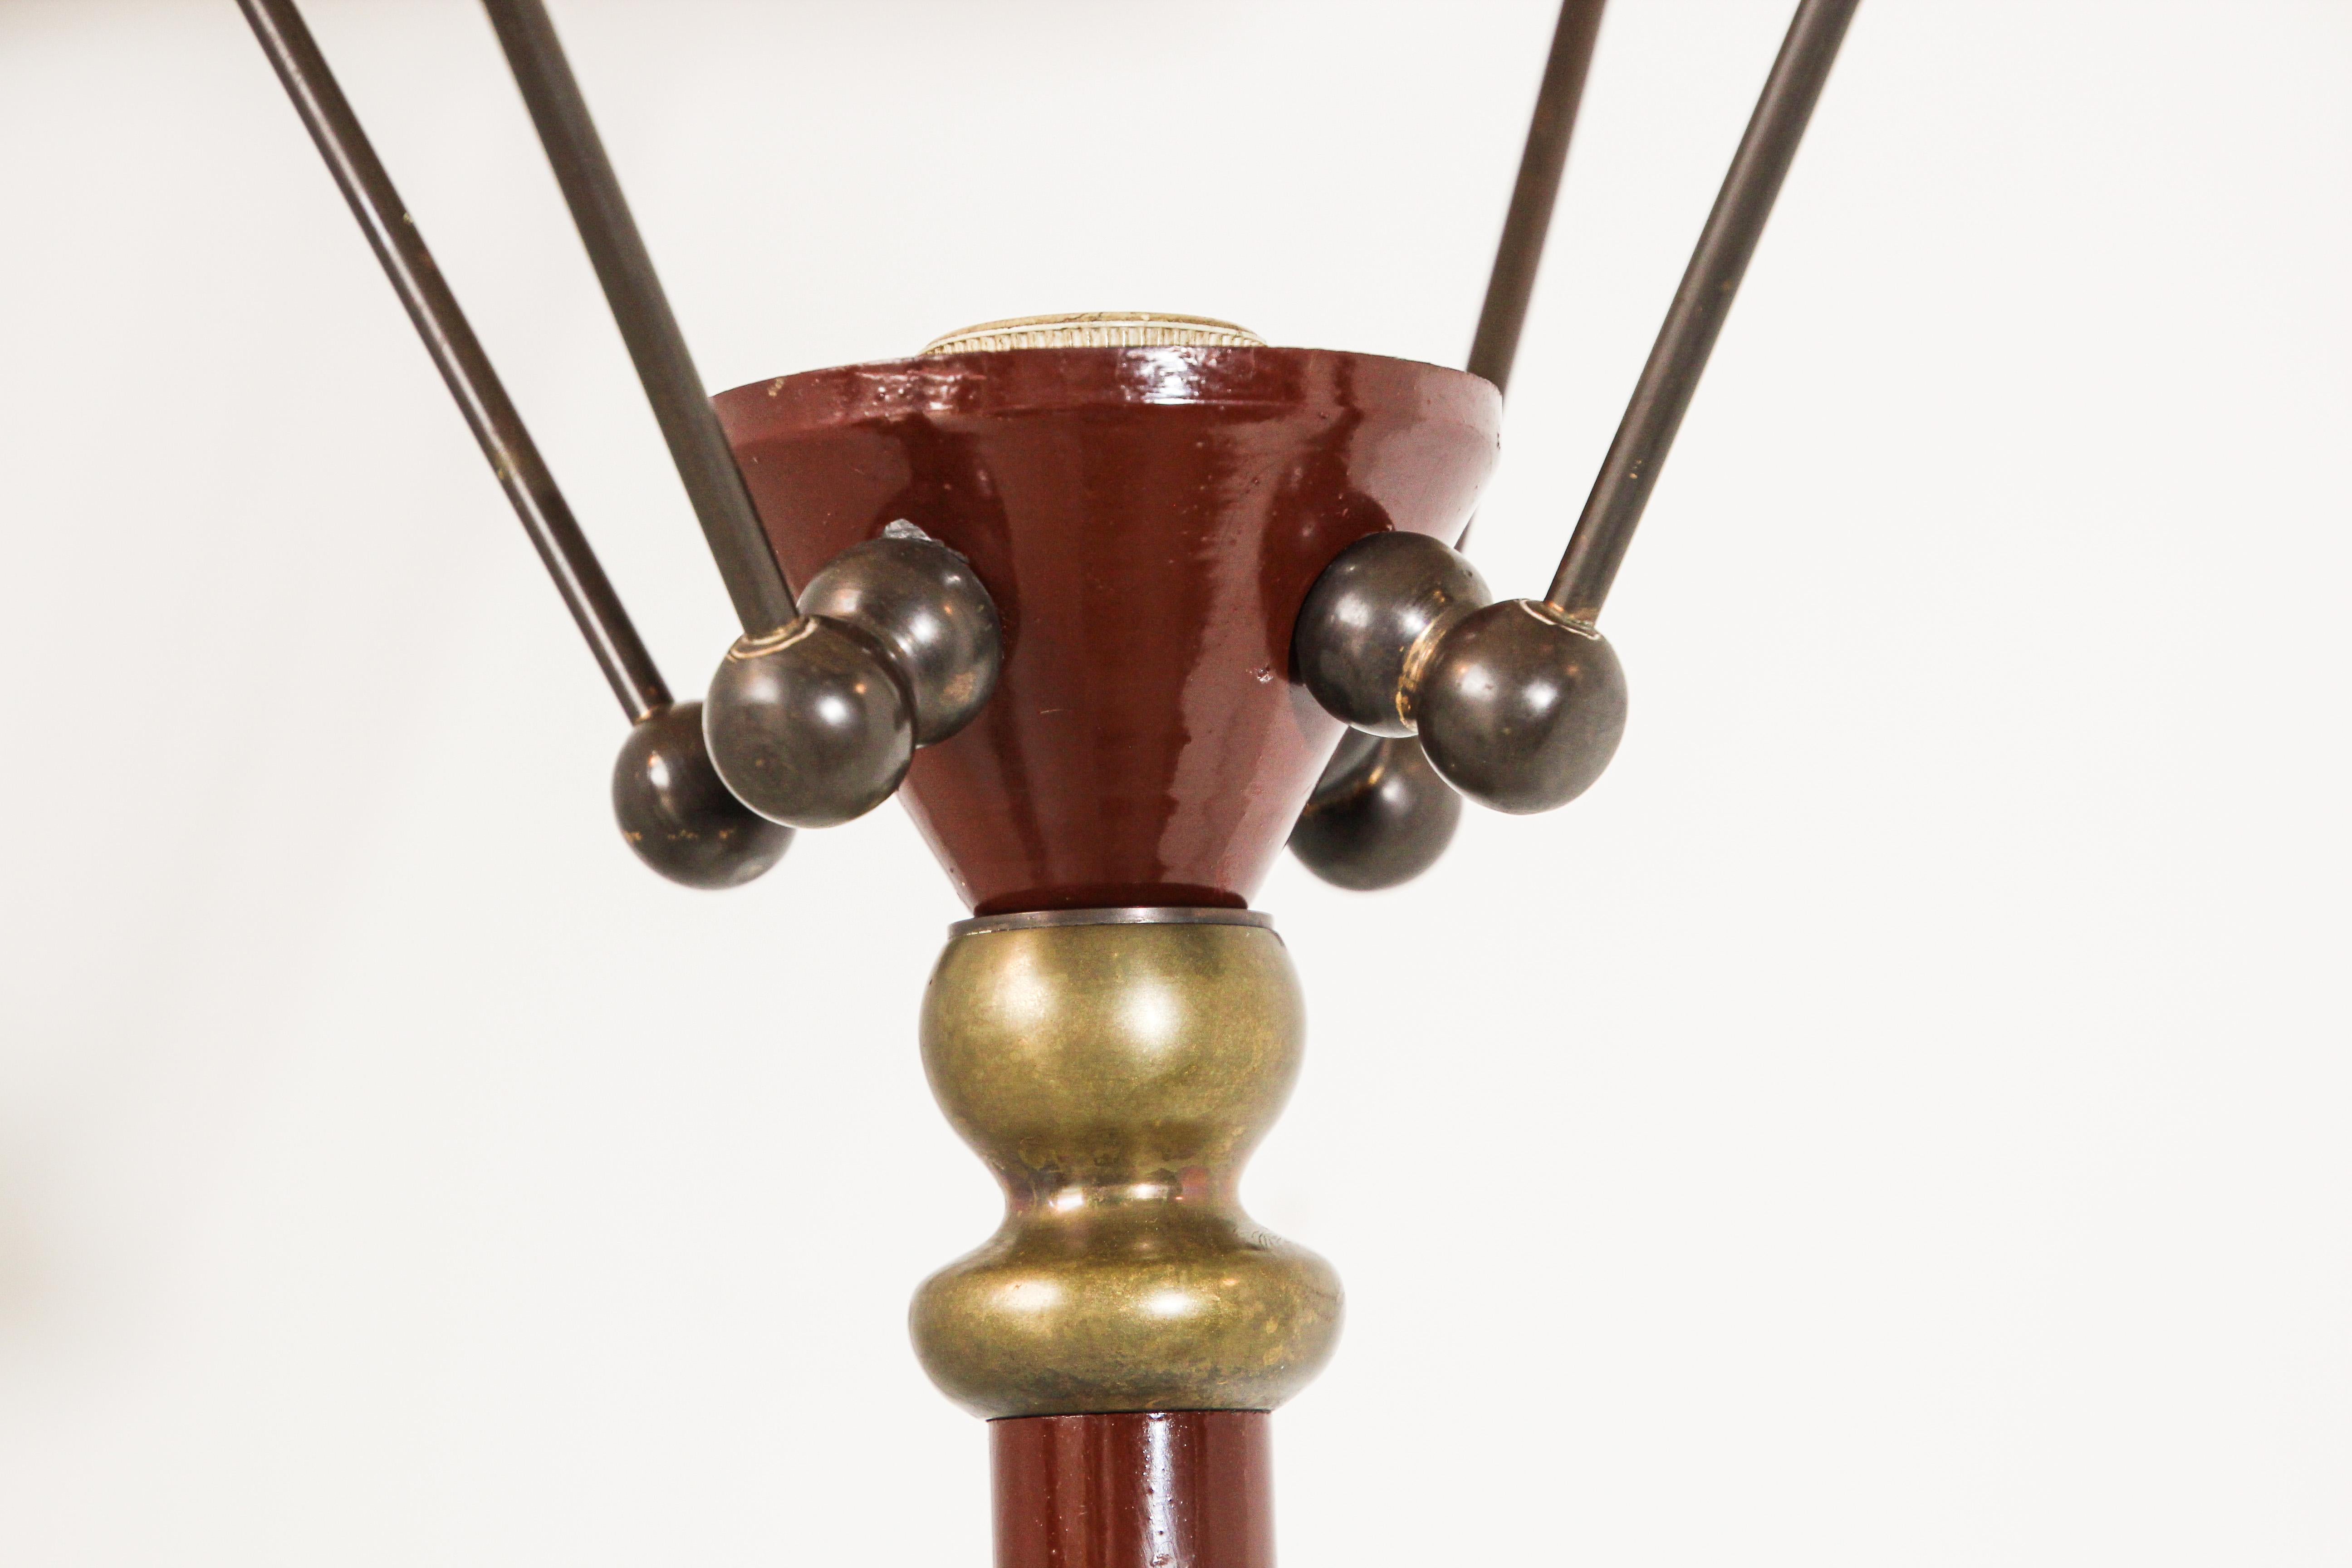 Vintage Sculptural French Tripod Floor Lamp Brown Enamel Shade, 1950s For Sale 3